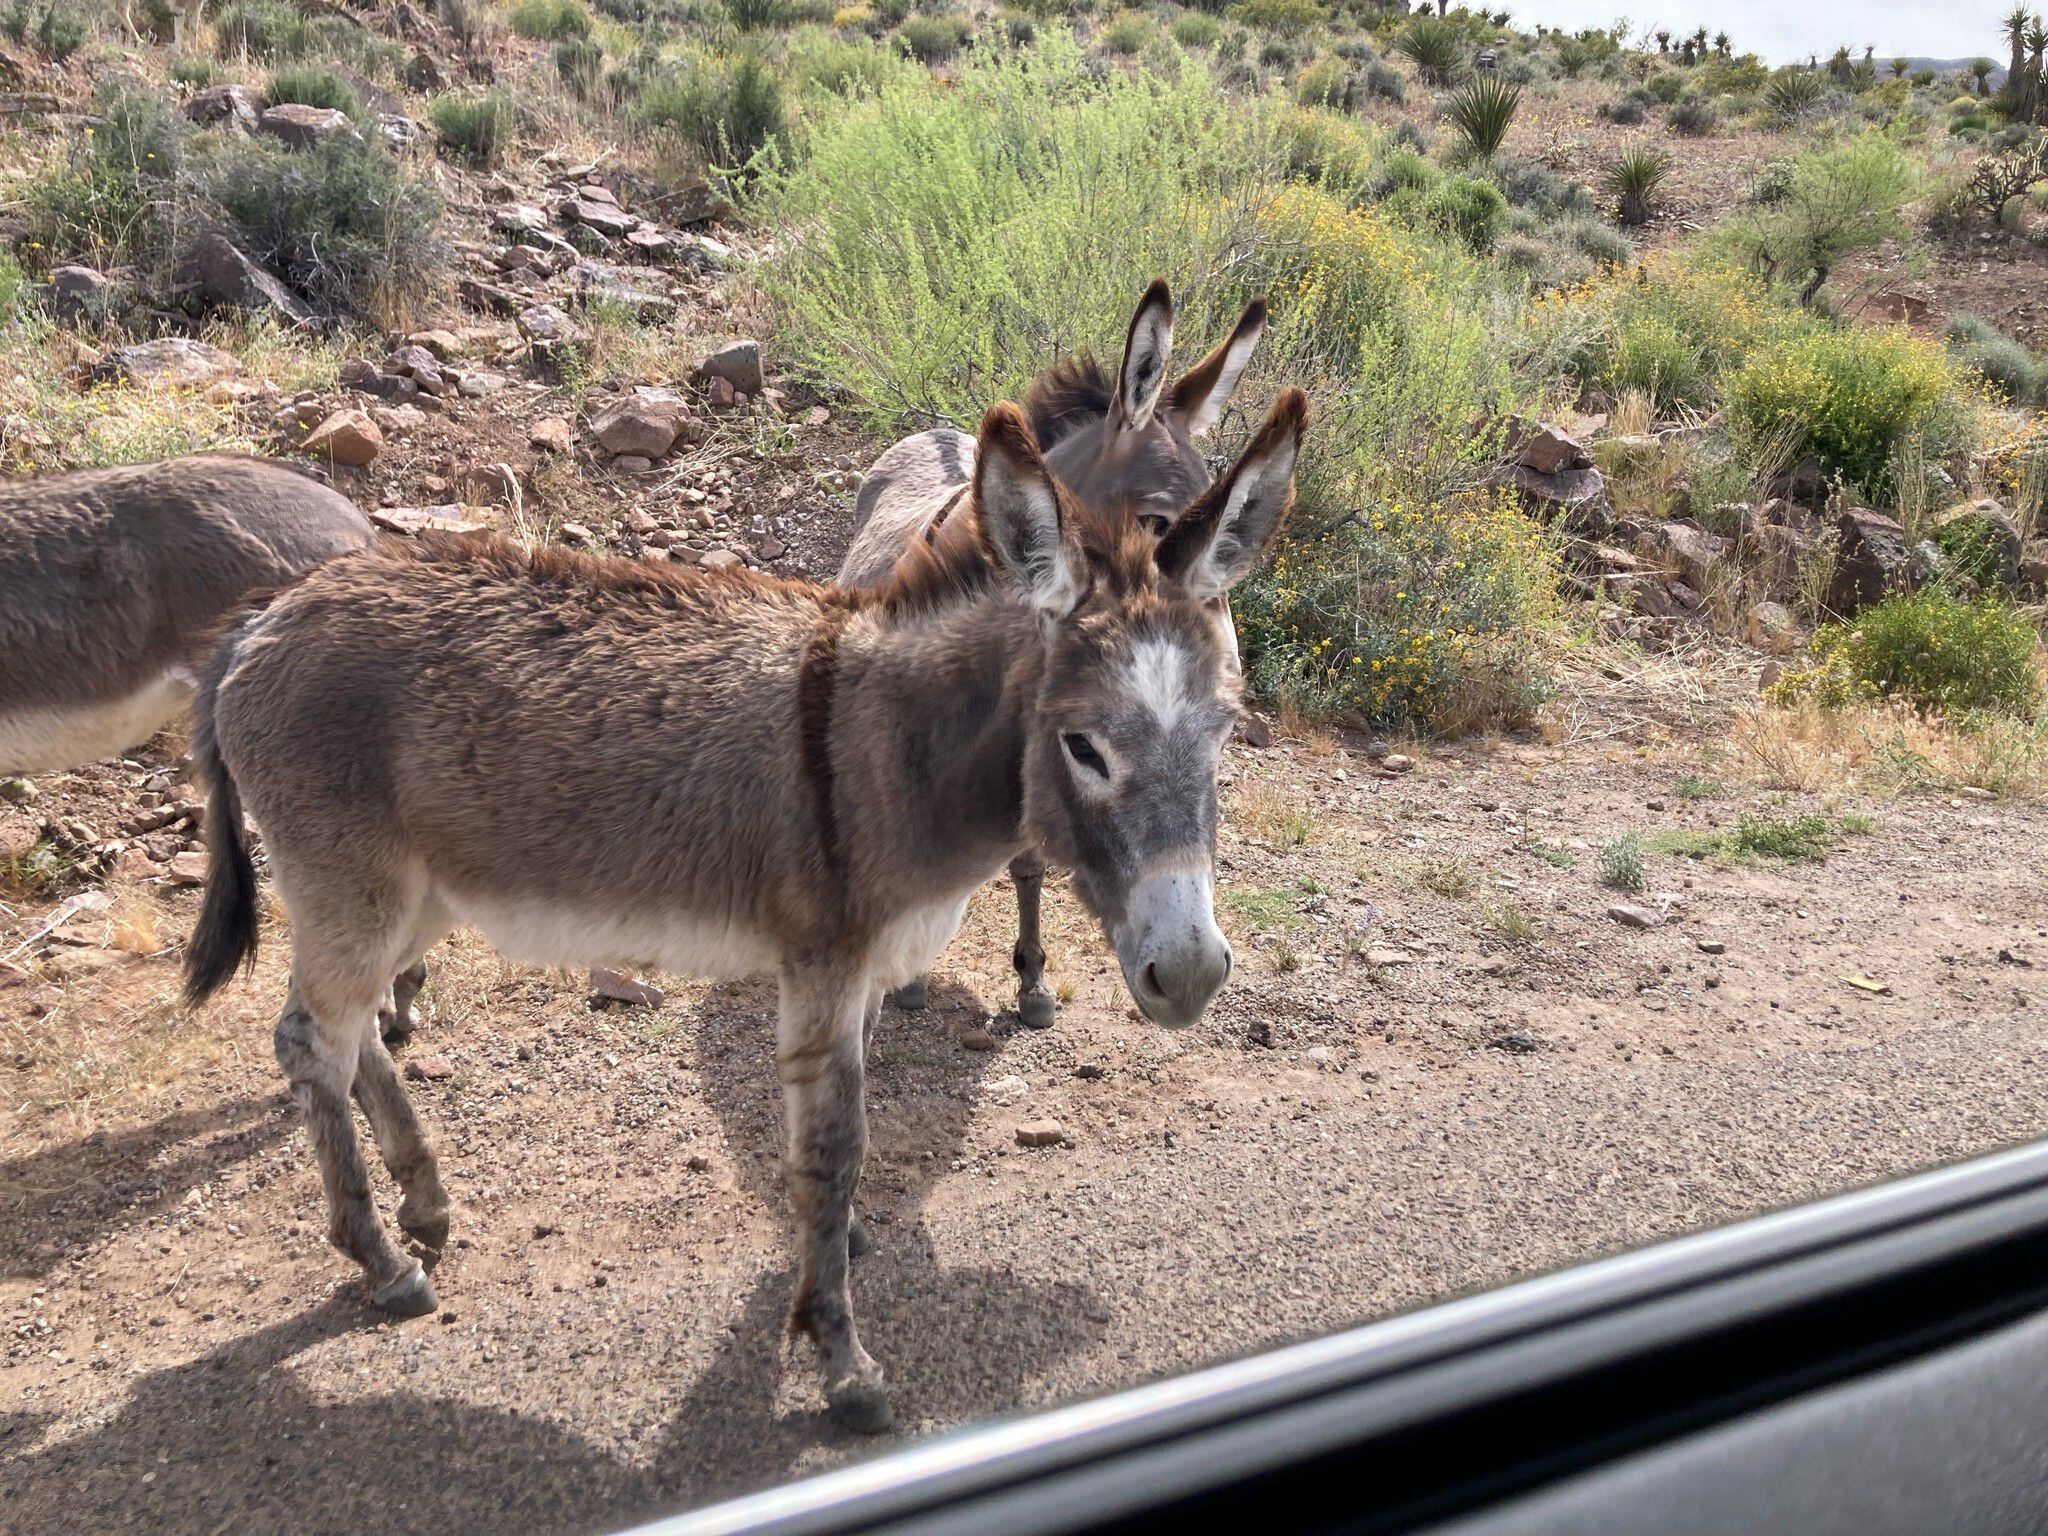 The WJOL crew gets up close with Oatman's famous burros.